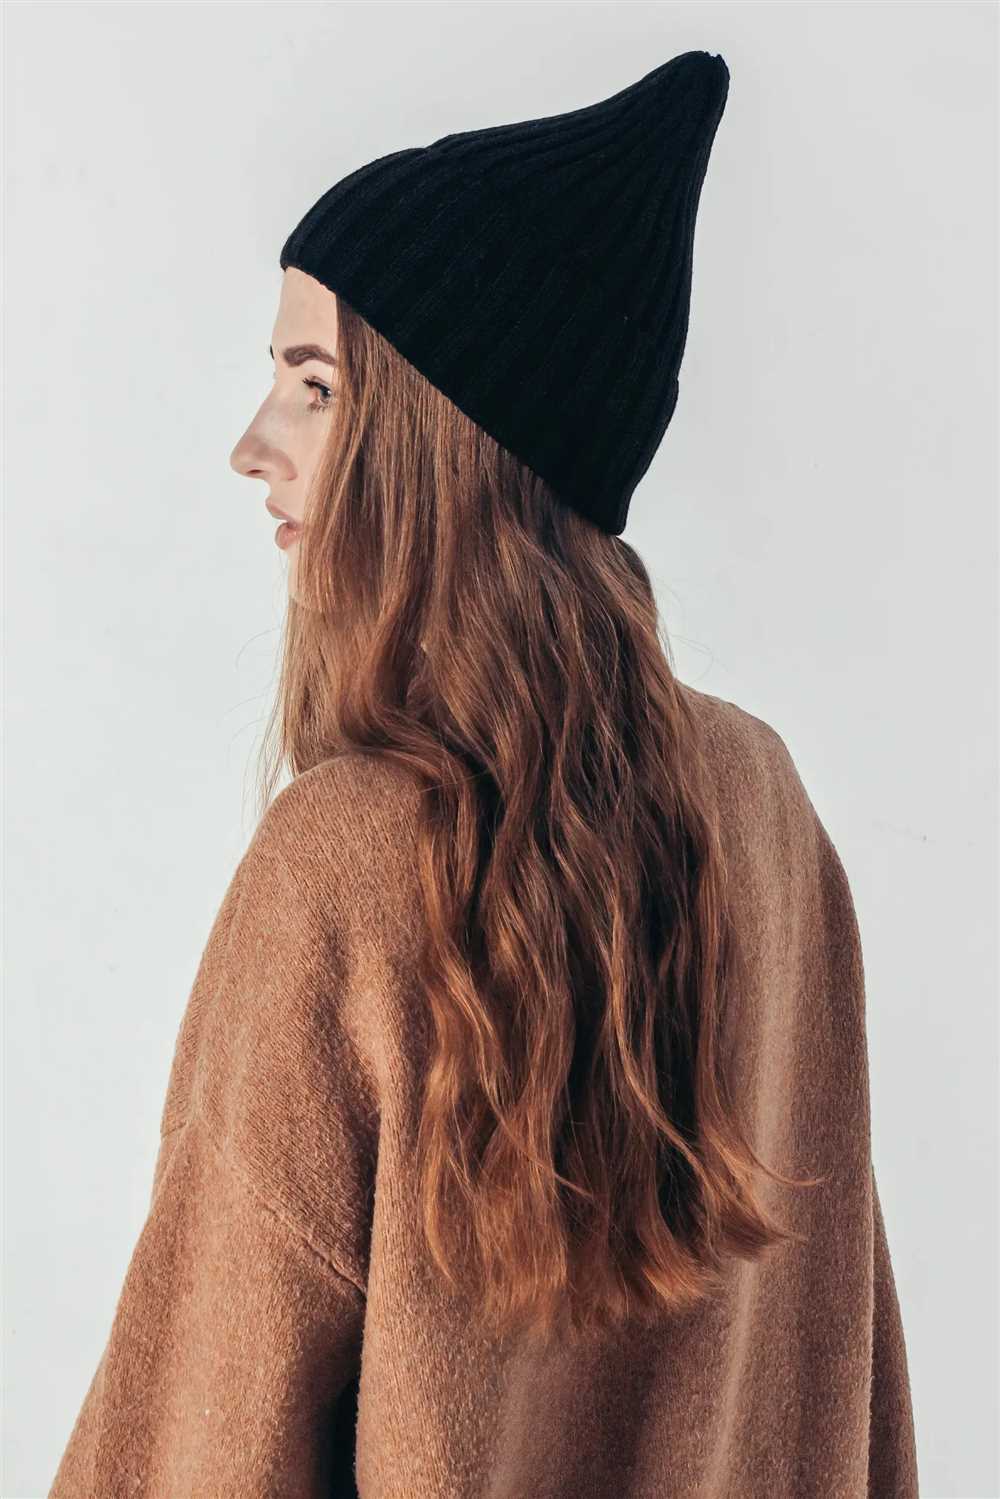 How to wear a beanie with long hair girl